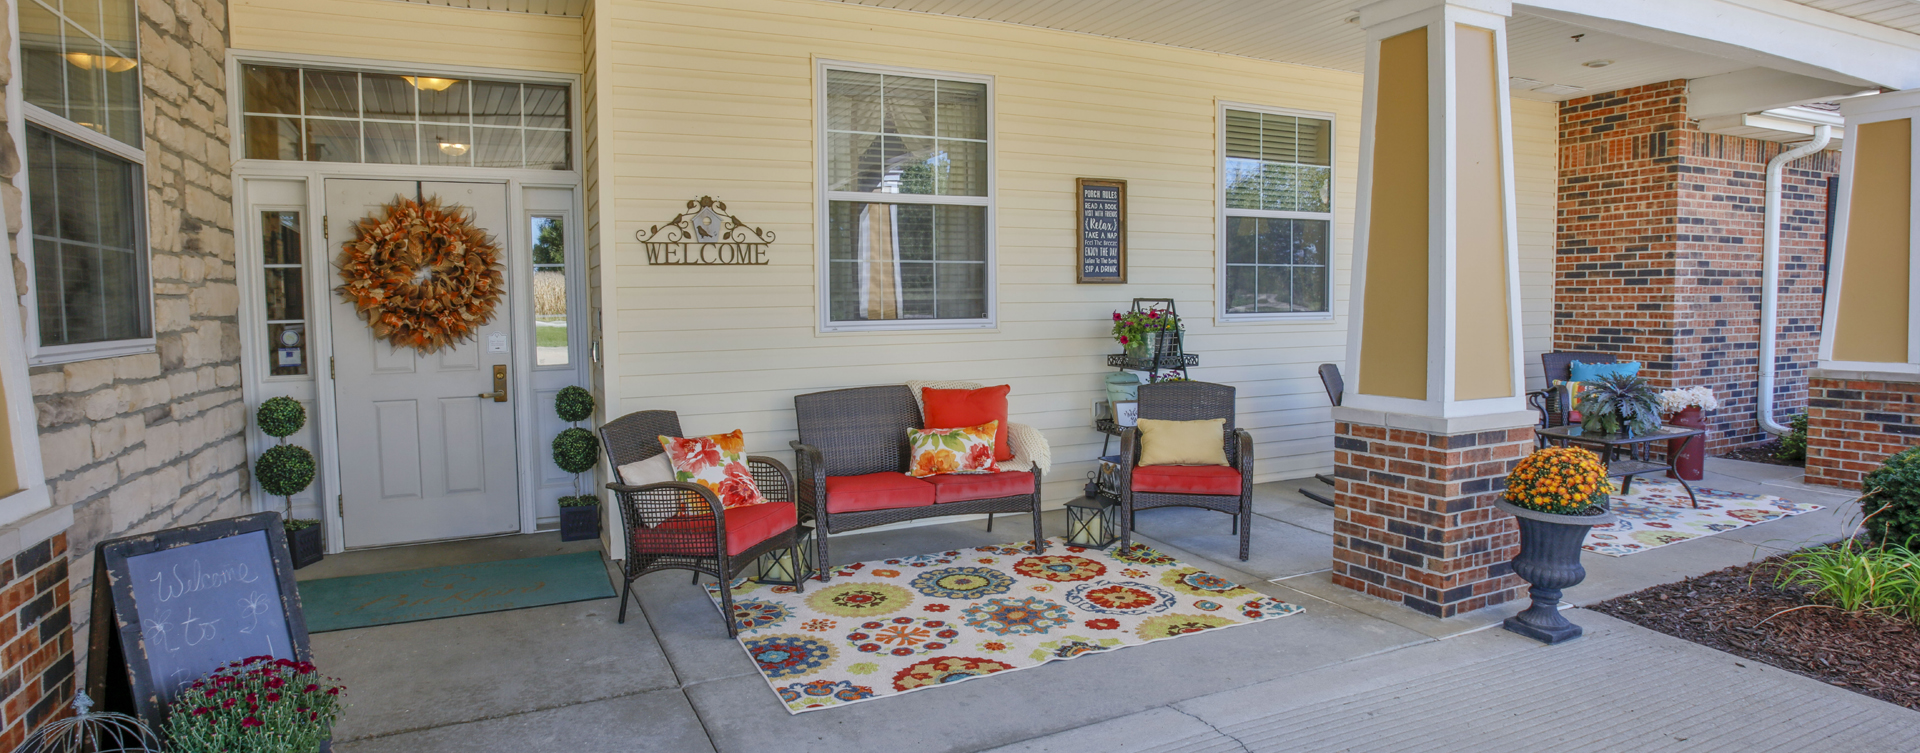 Enjoy conversations with friends on the porch at Bickford of Champaign